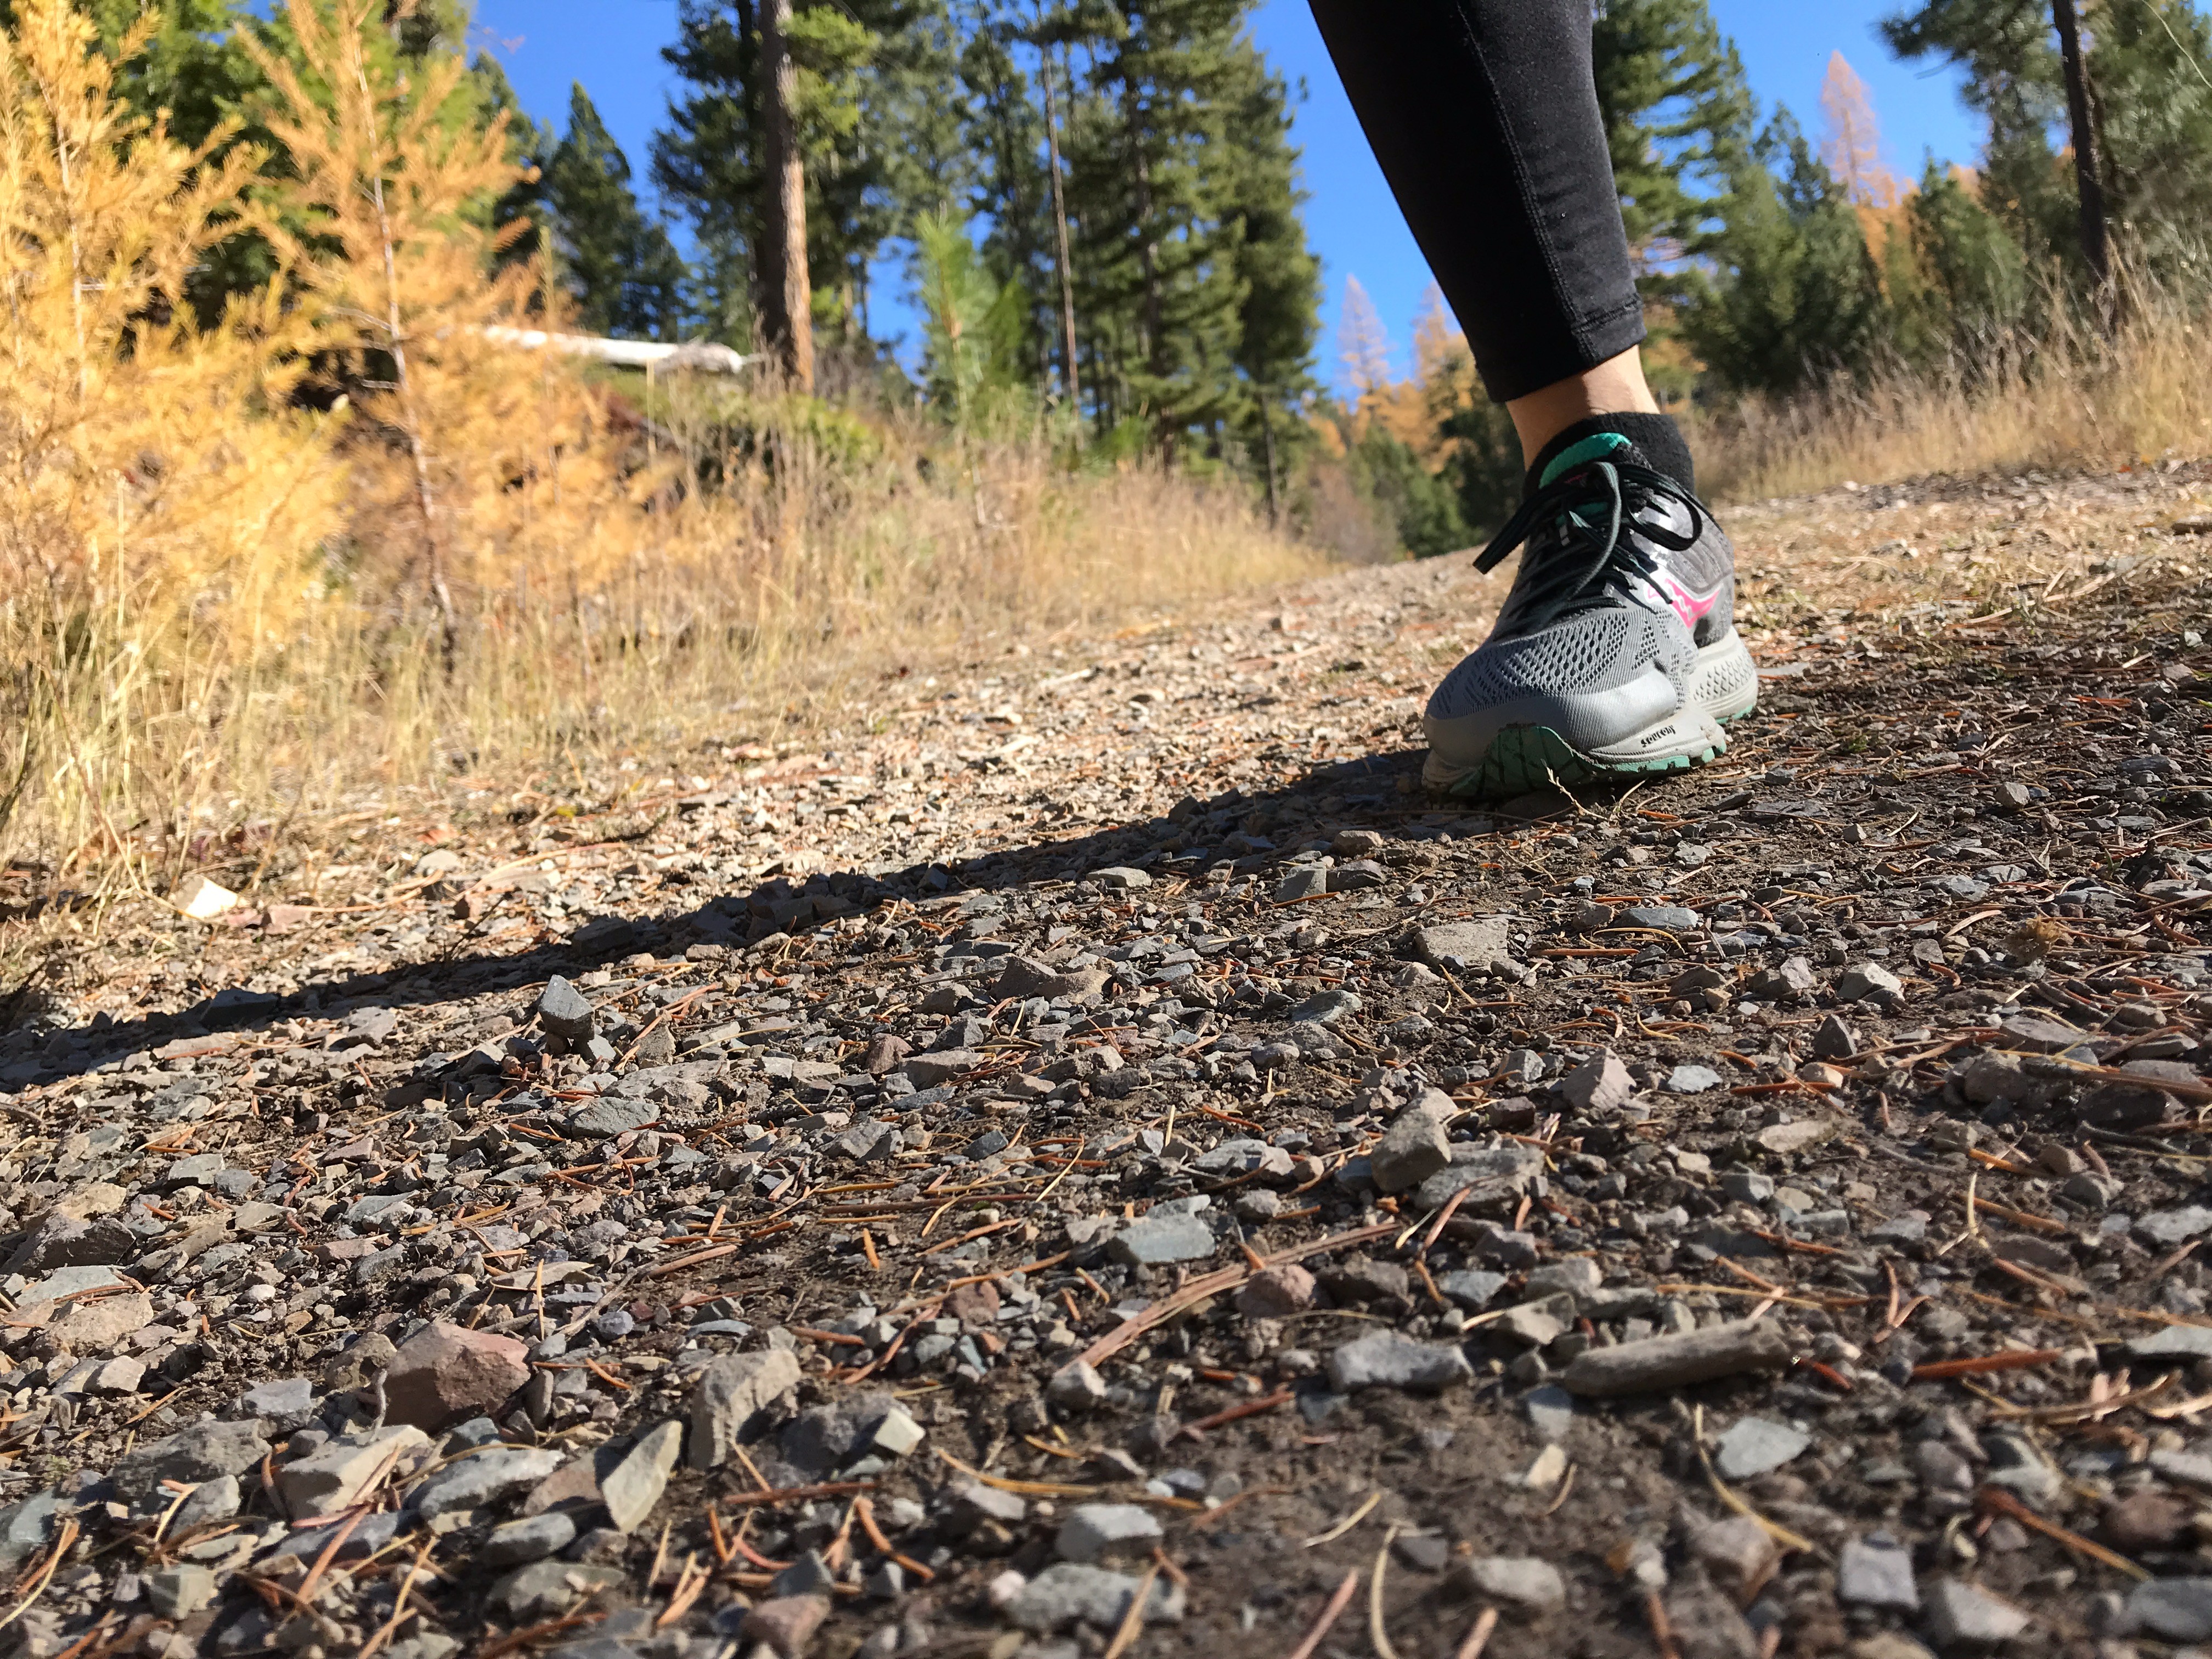 Product Review: Saucony Ride GTX - The 